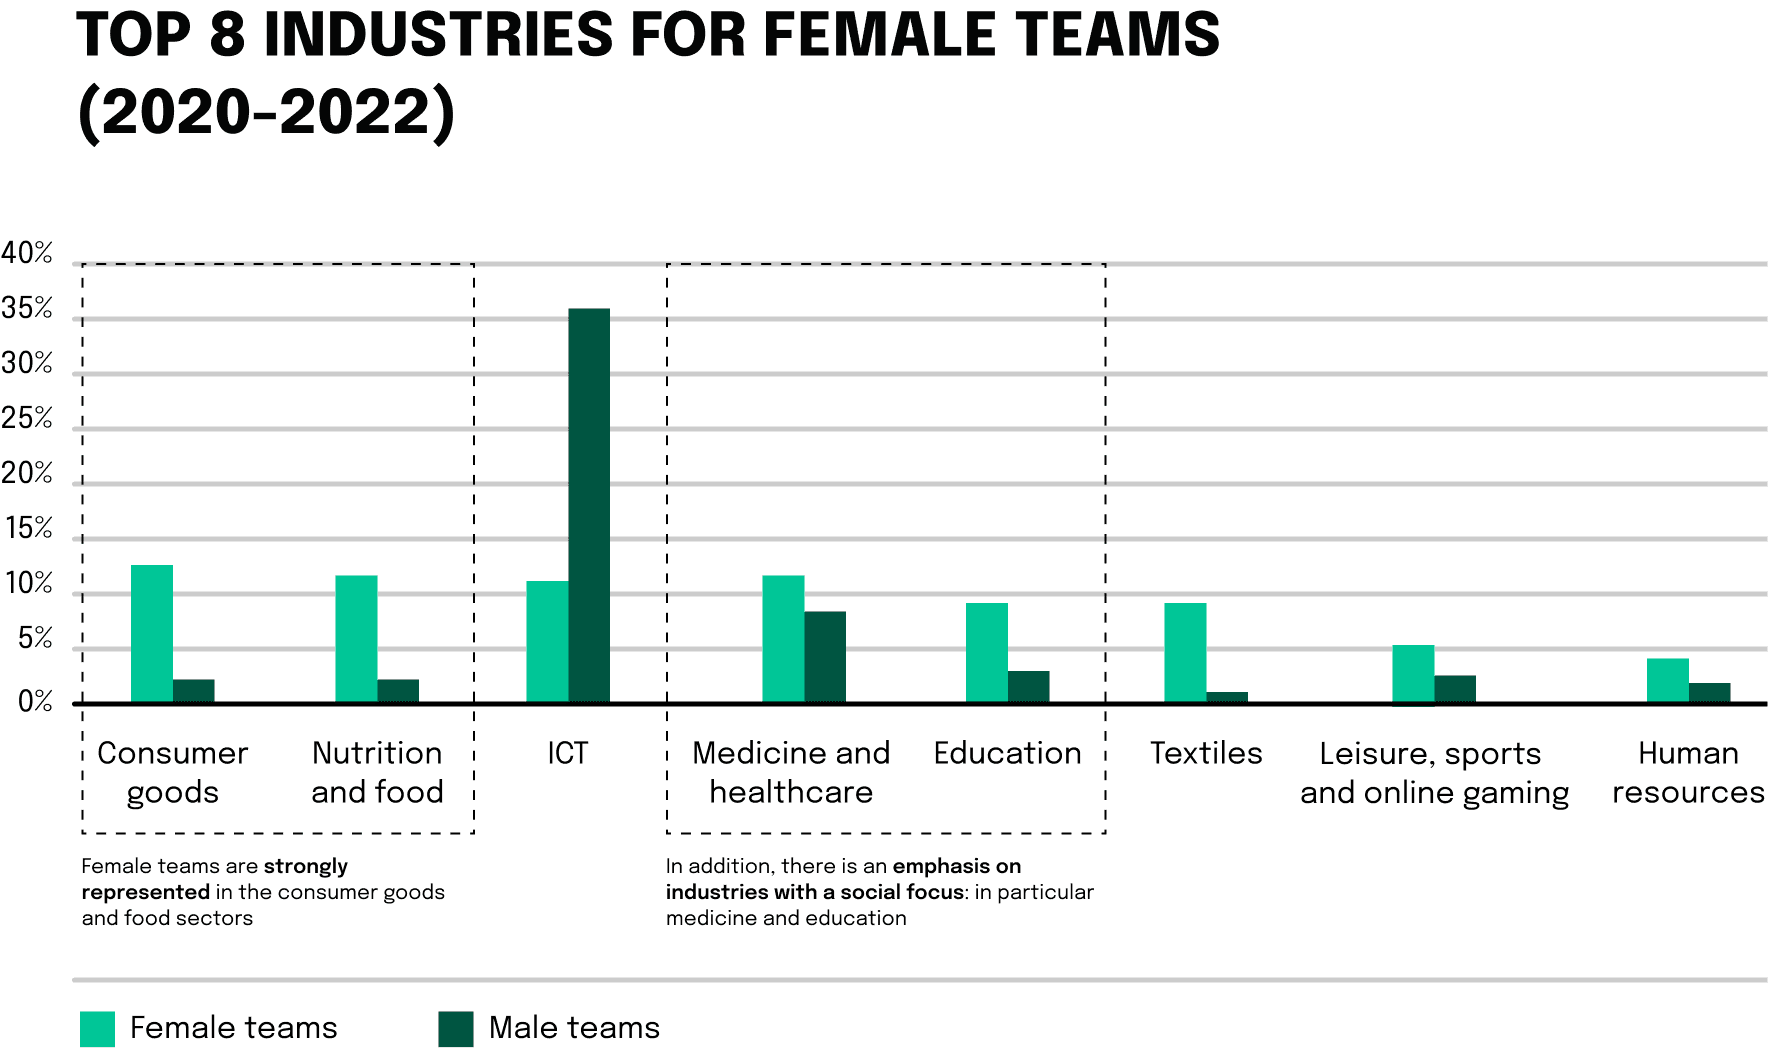 Graphic: Top 8 Industries for Female Teams